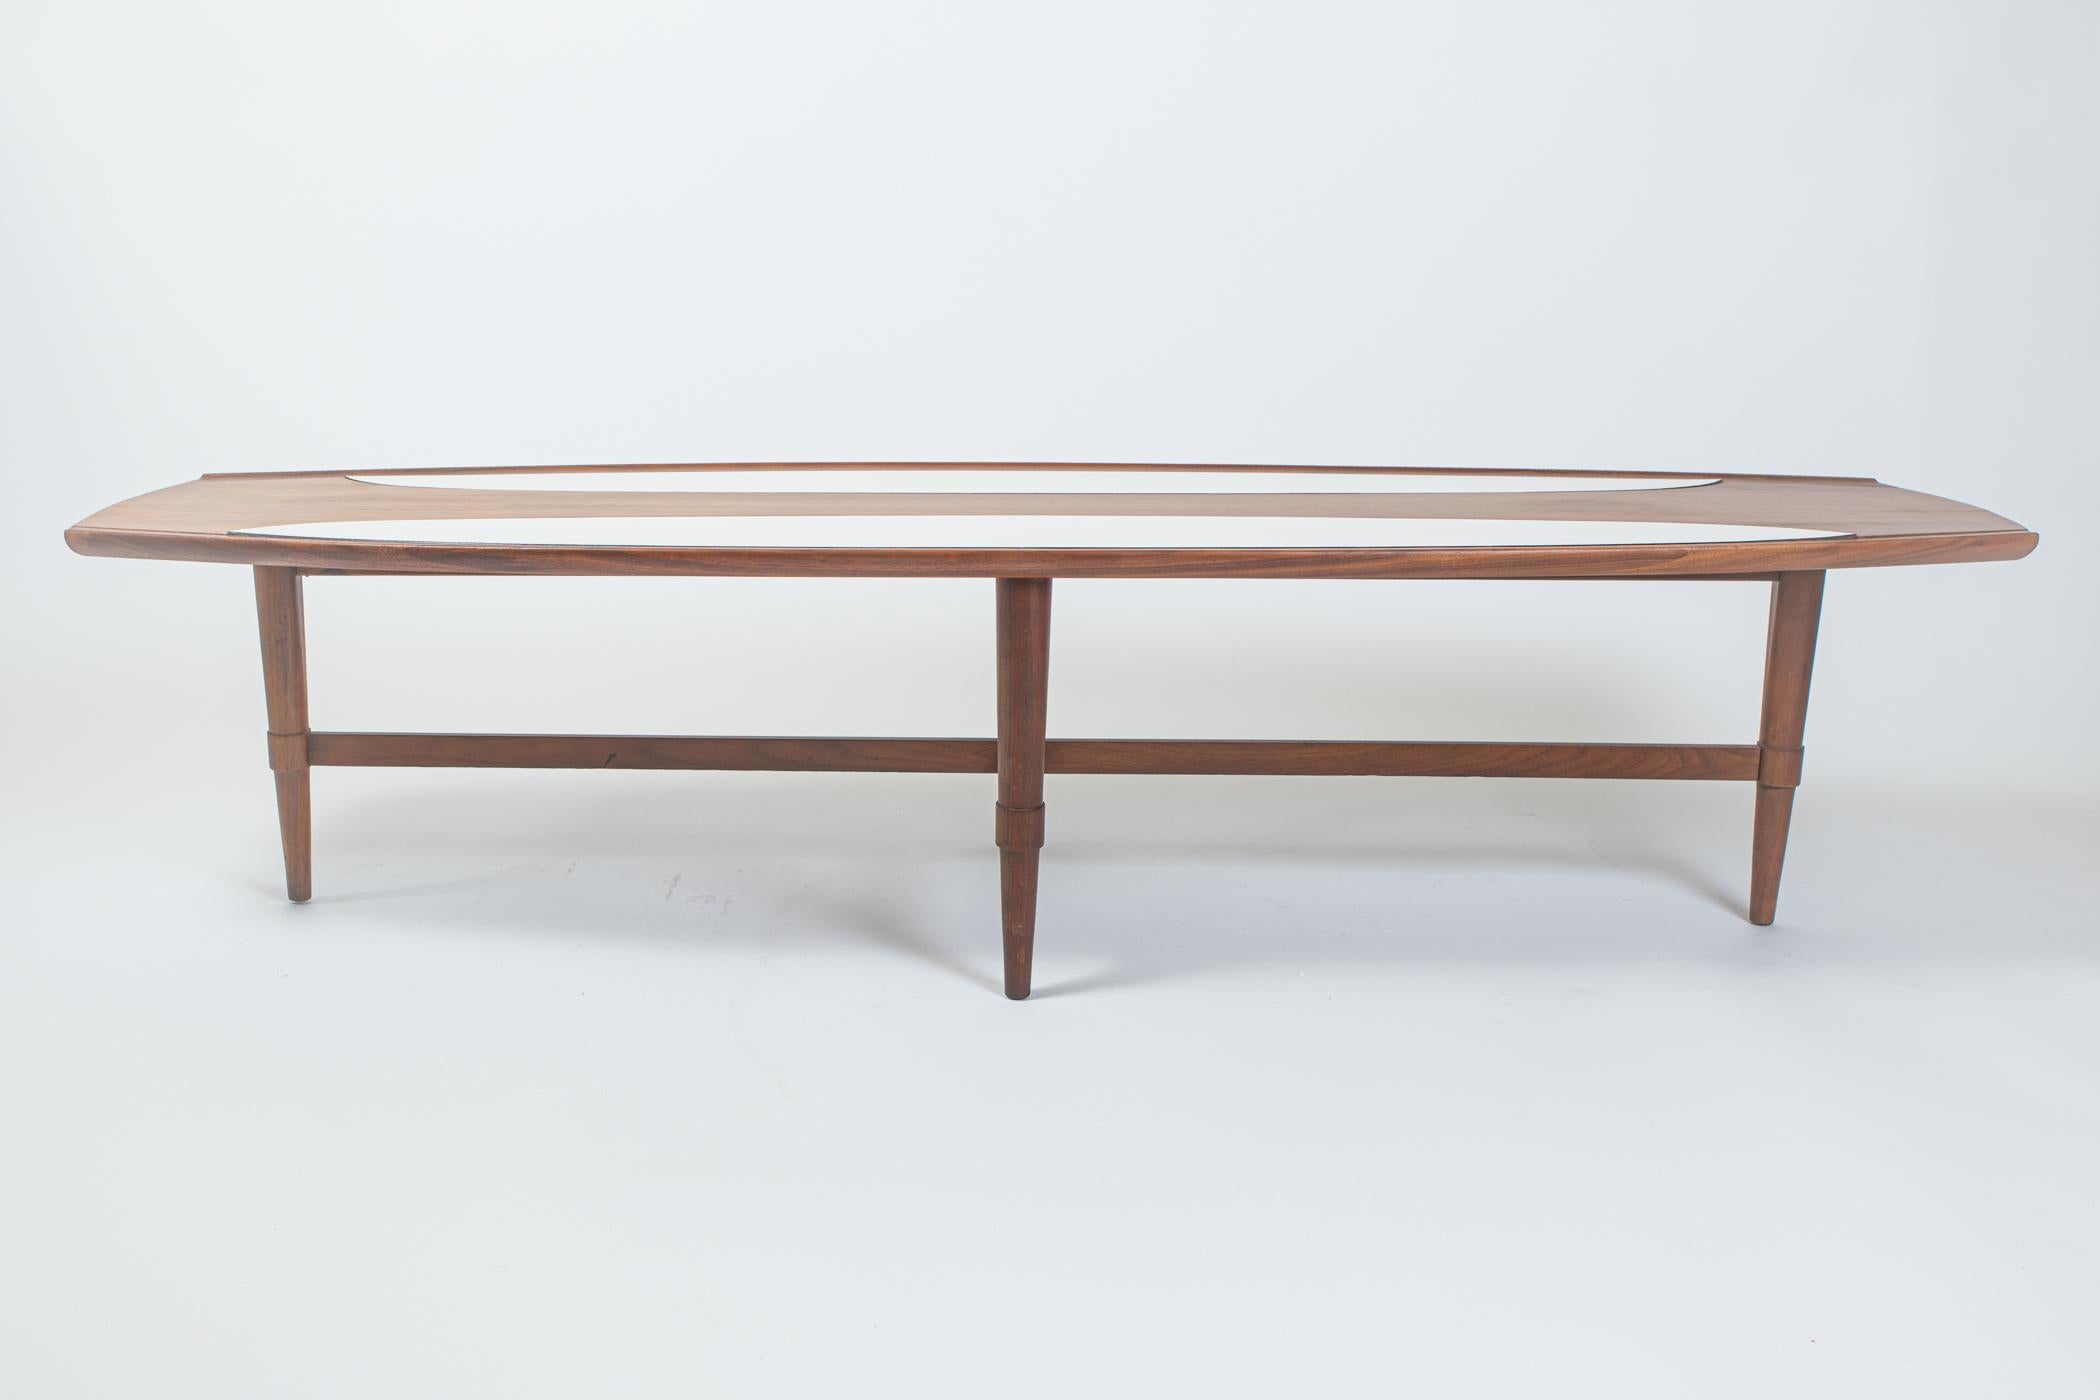 Authentic vintage walnut surfboard coffee table with white laminate accents. This piece takes its inspiration on the Classic design on surfboards. The Classic surfboard shape receives a modernist touch with the contrasting white laminate panels.